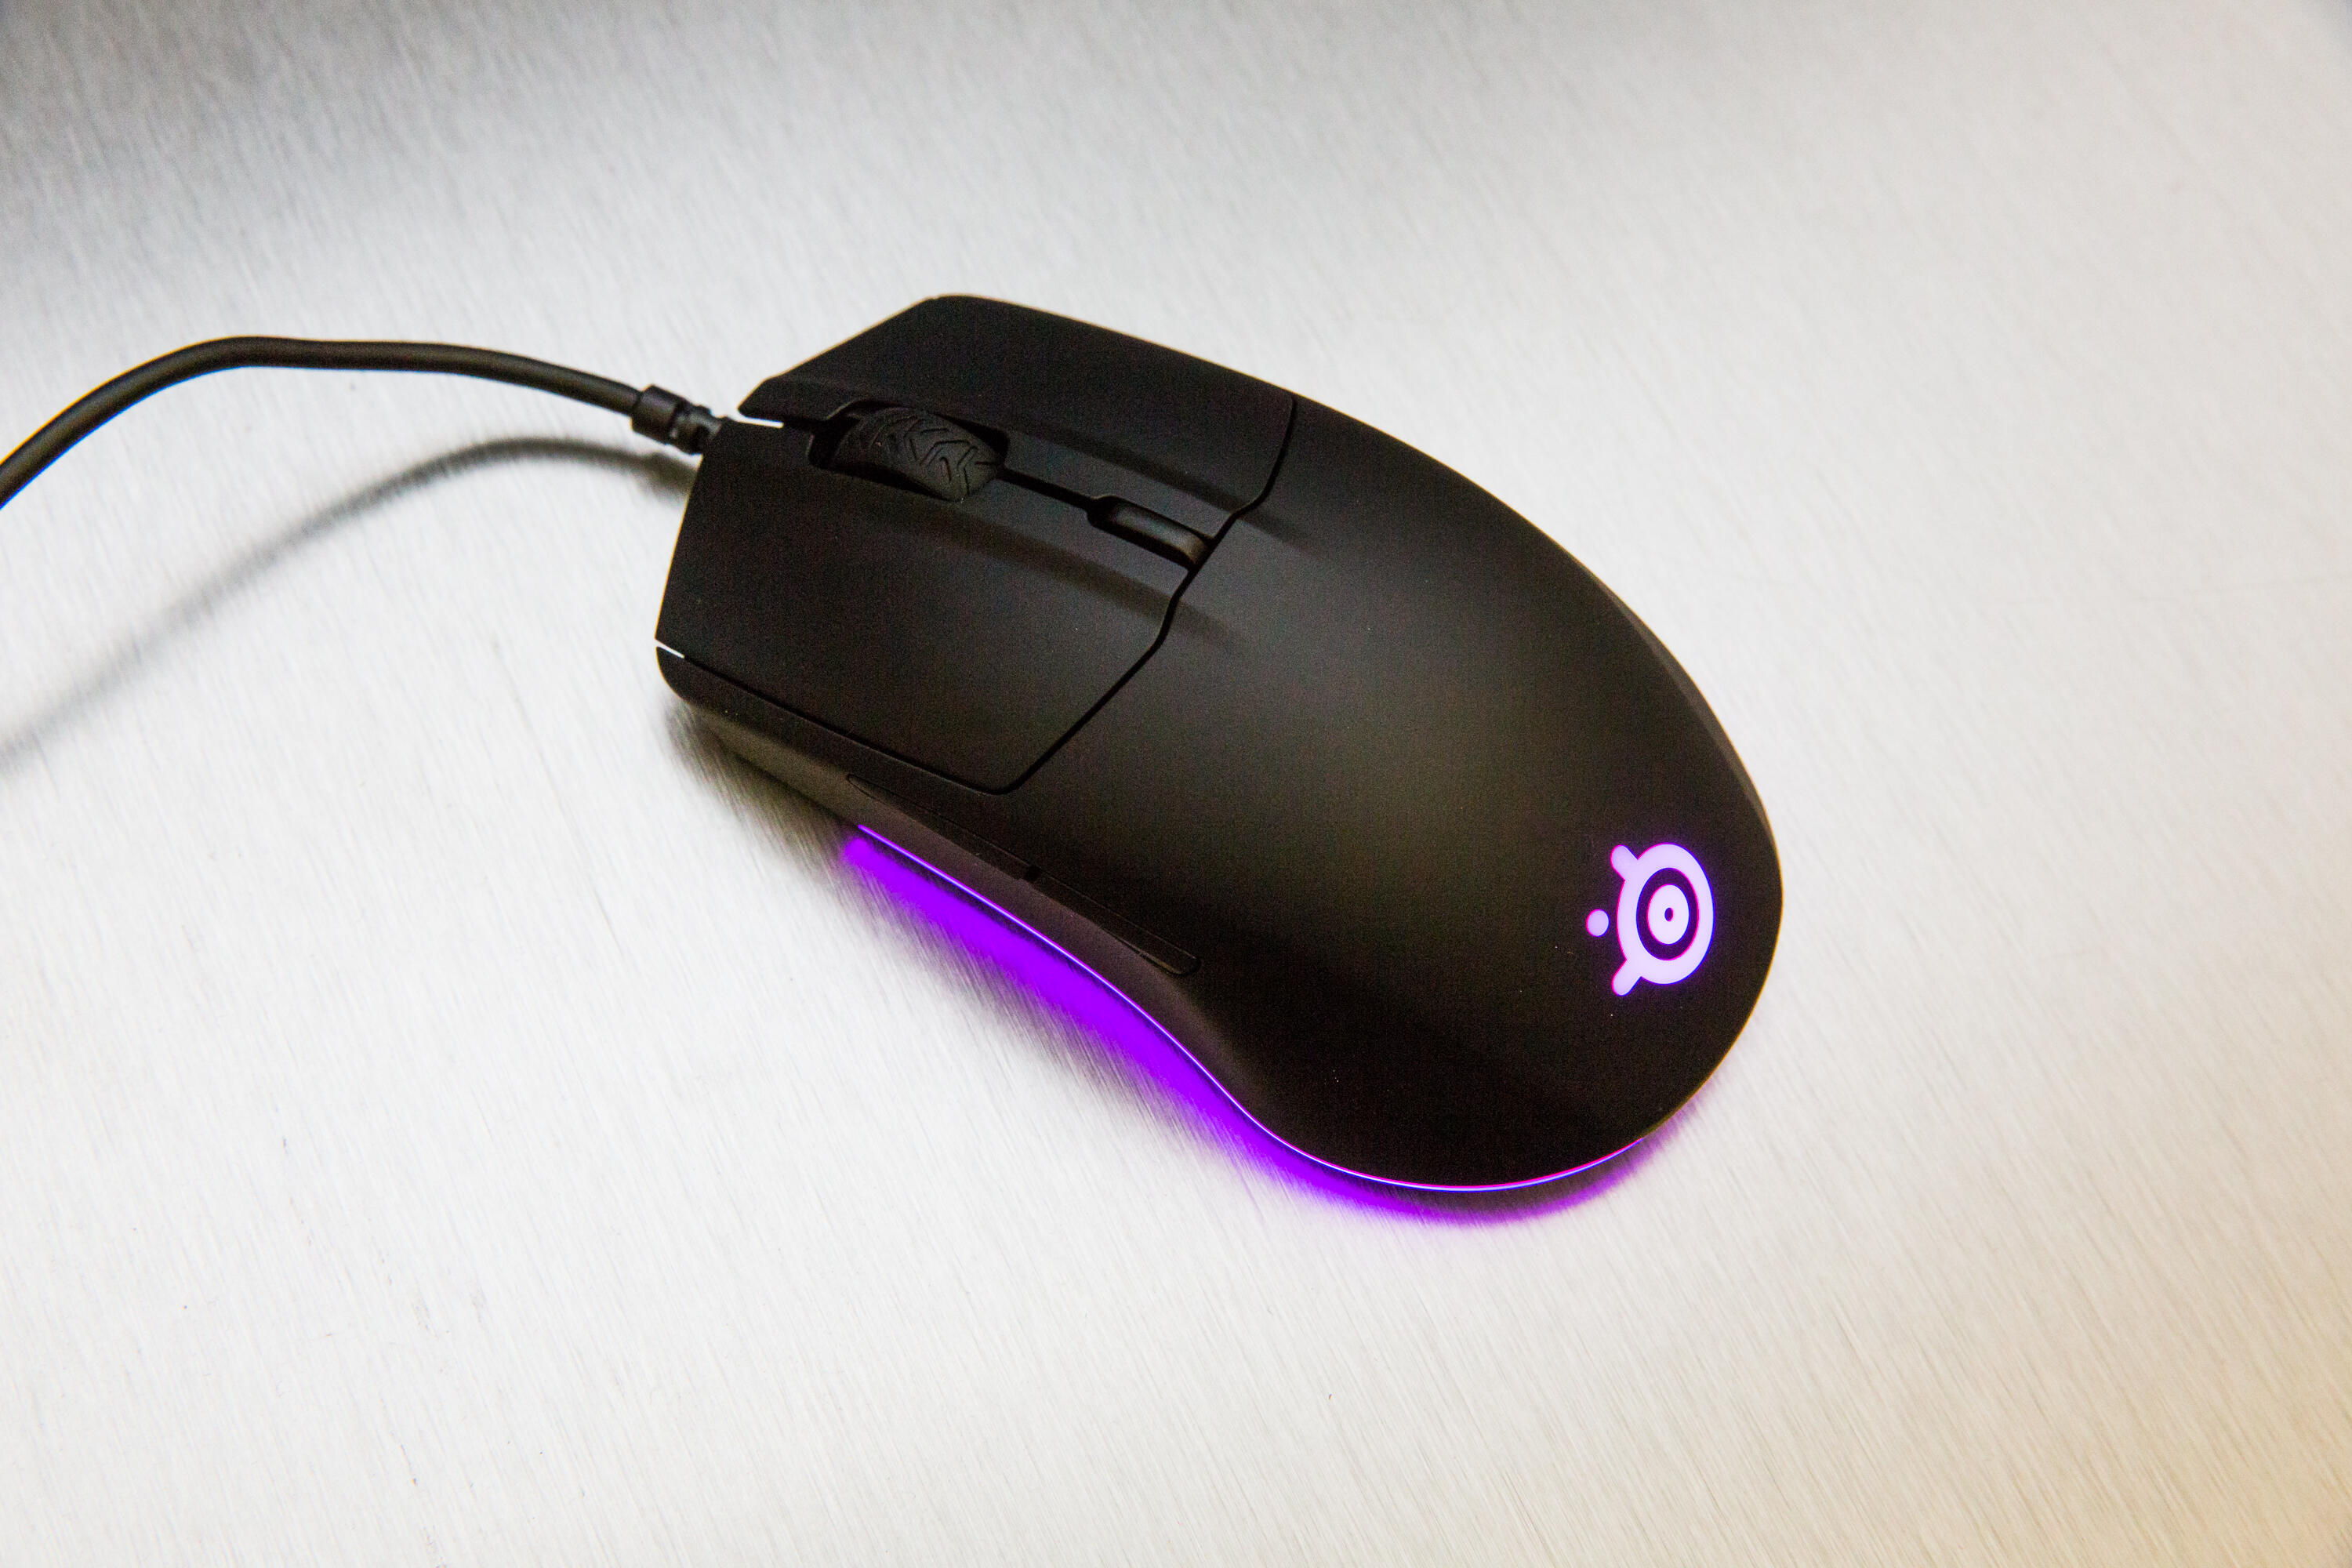 The Best Cheap And Budget Gaming Mouse - Fall 2023: Mice Reviews 